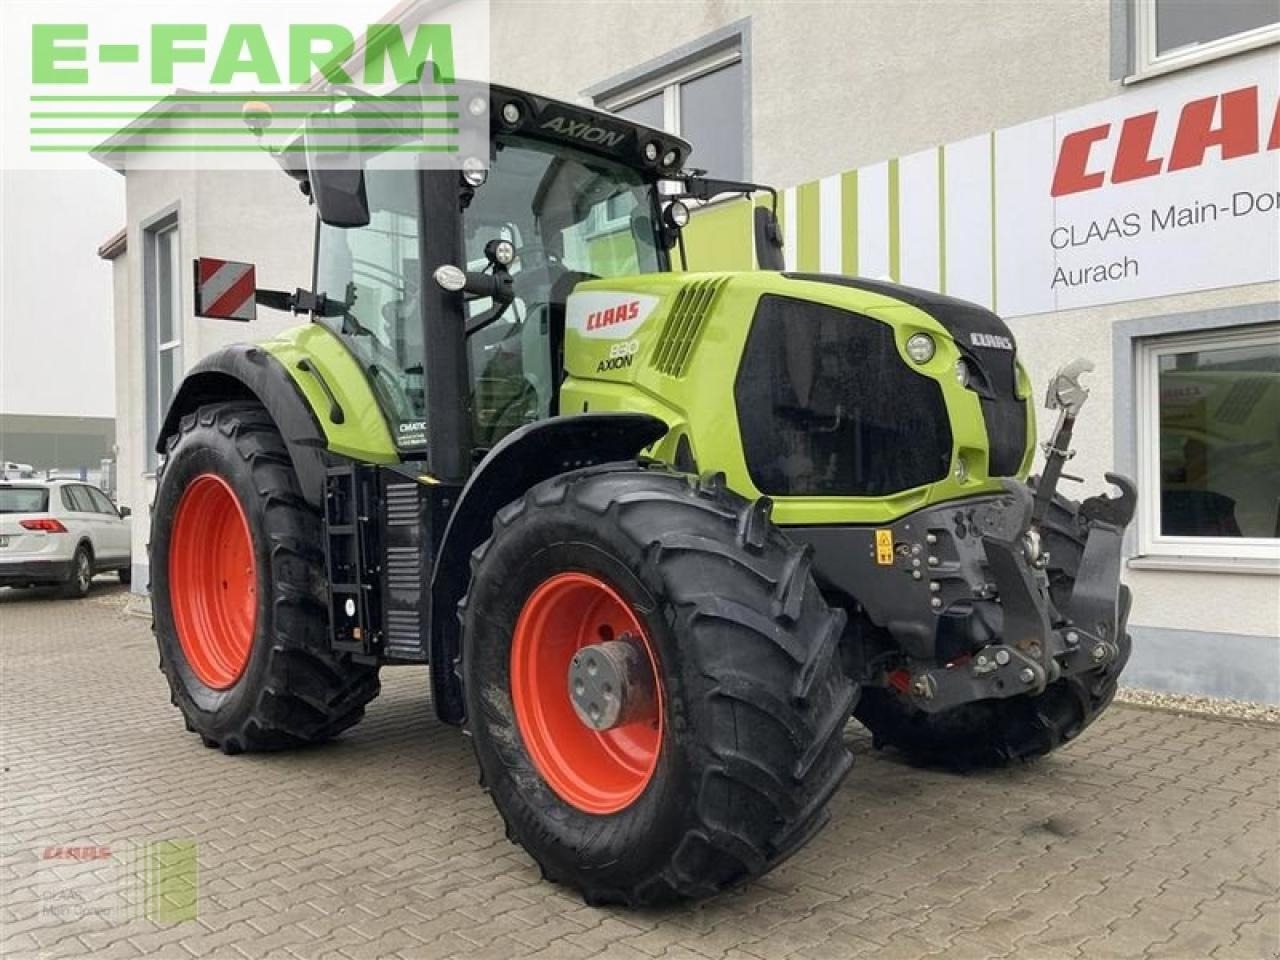 Farm tractor CLAAS axion 830 cmatic st5 cebis: picture 2